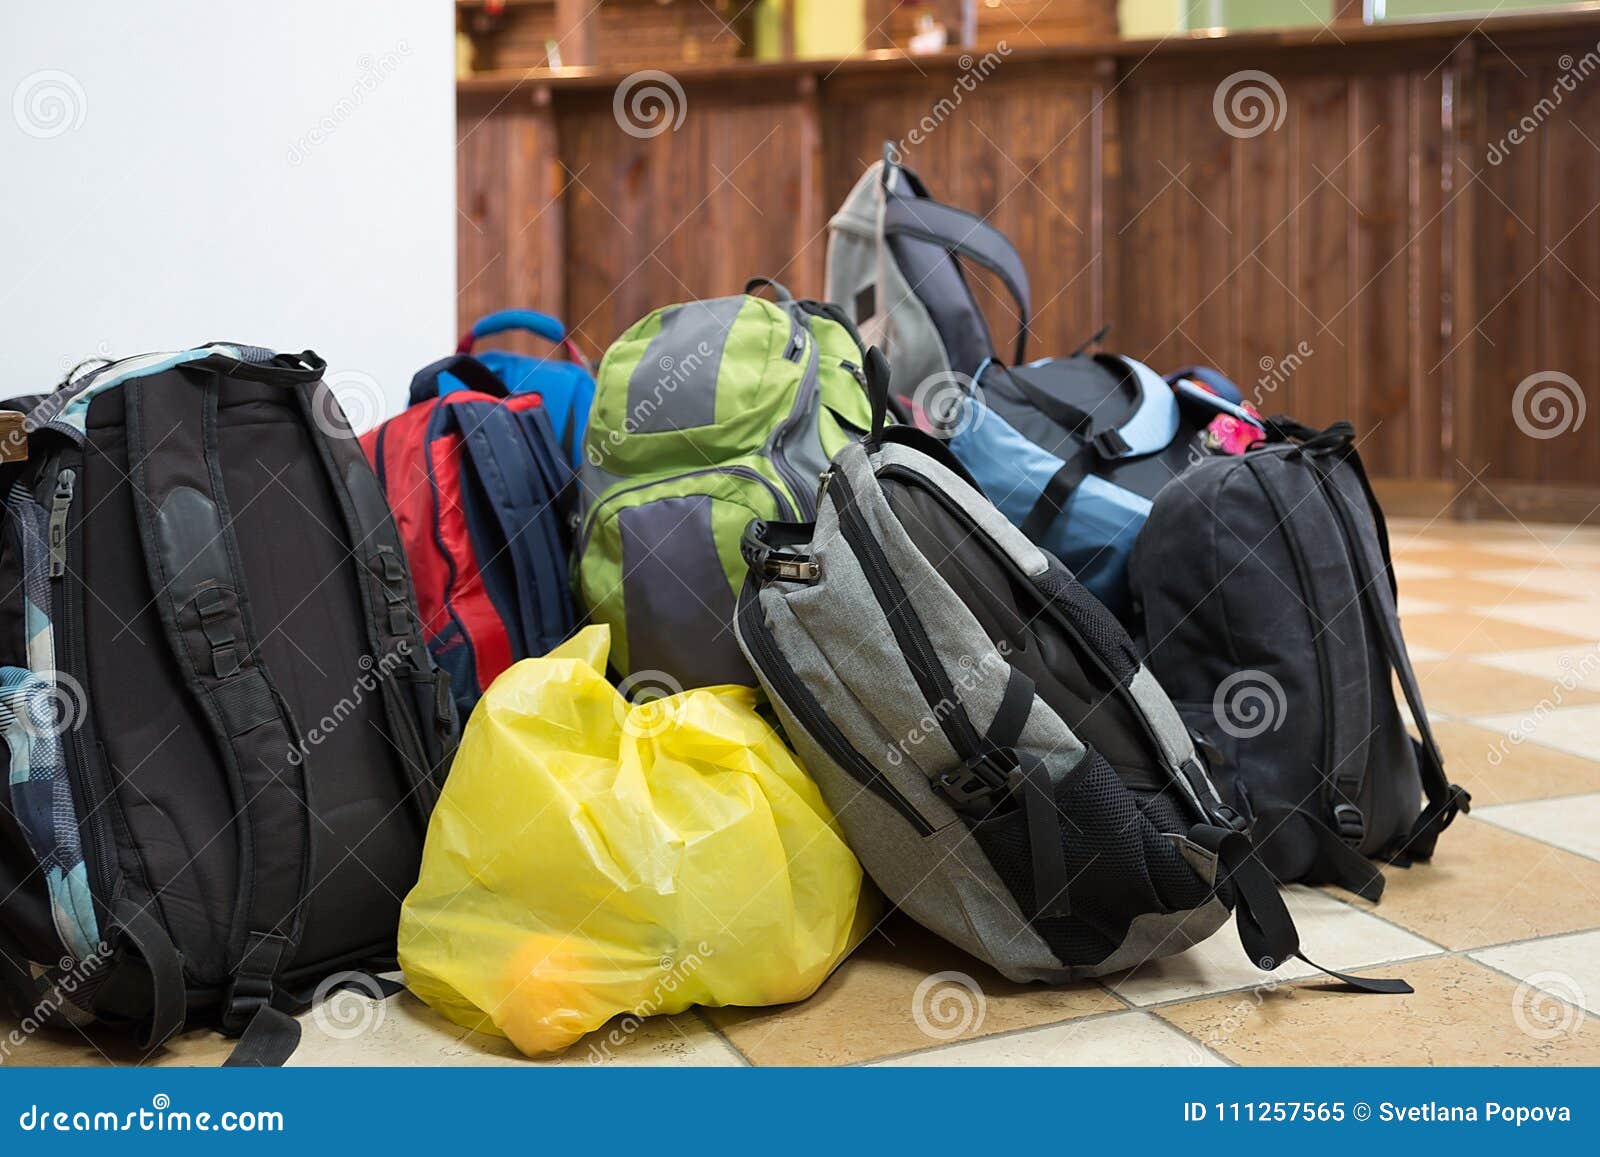 Discipline Active pageant Tourist Backpacks Stand on the Floor Indoors. Stock Image - Image of  handbag, backpacks: 111257565